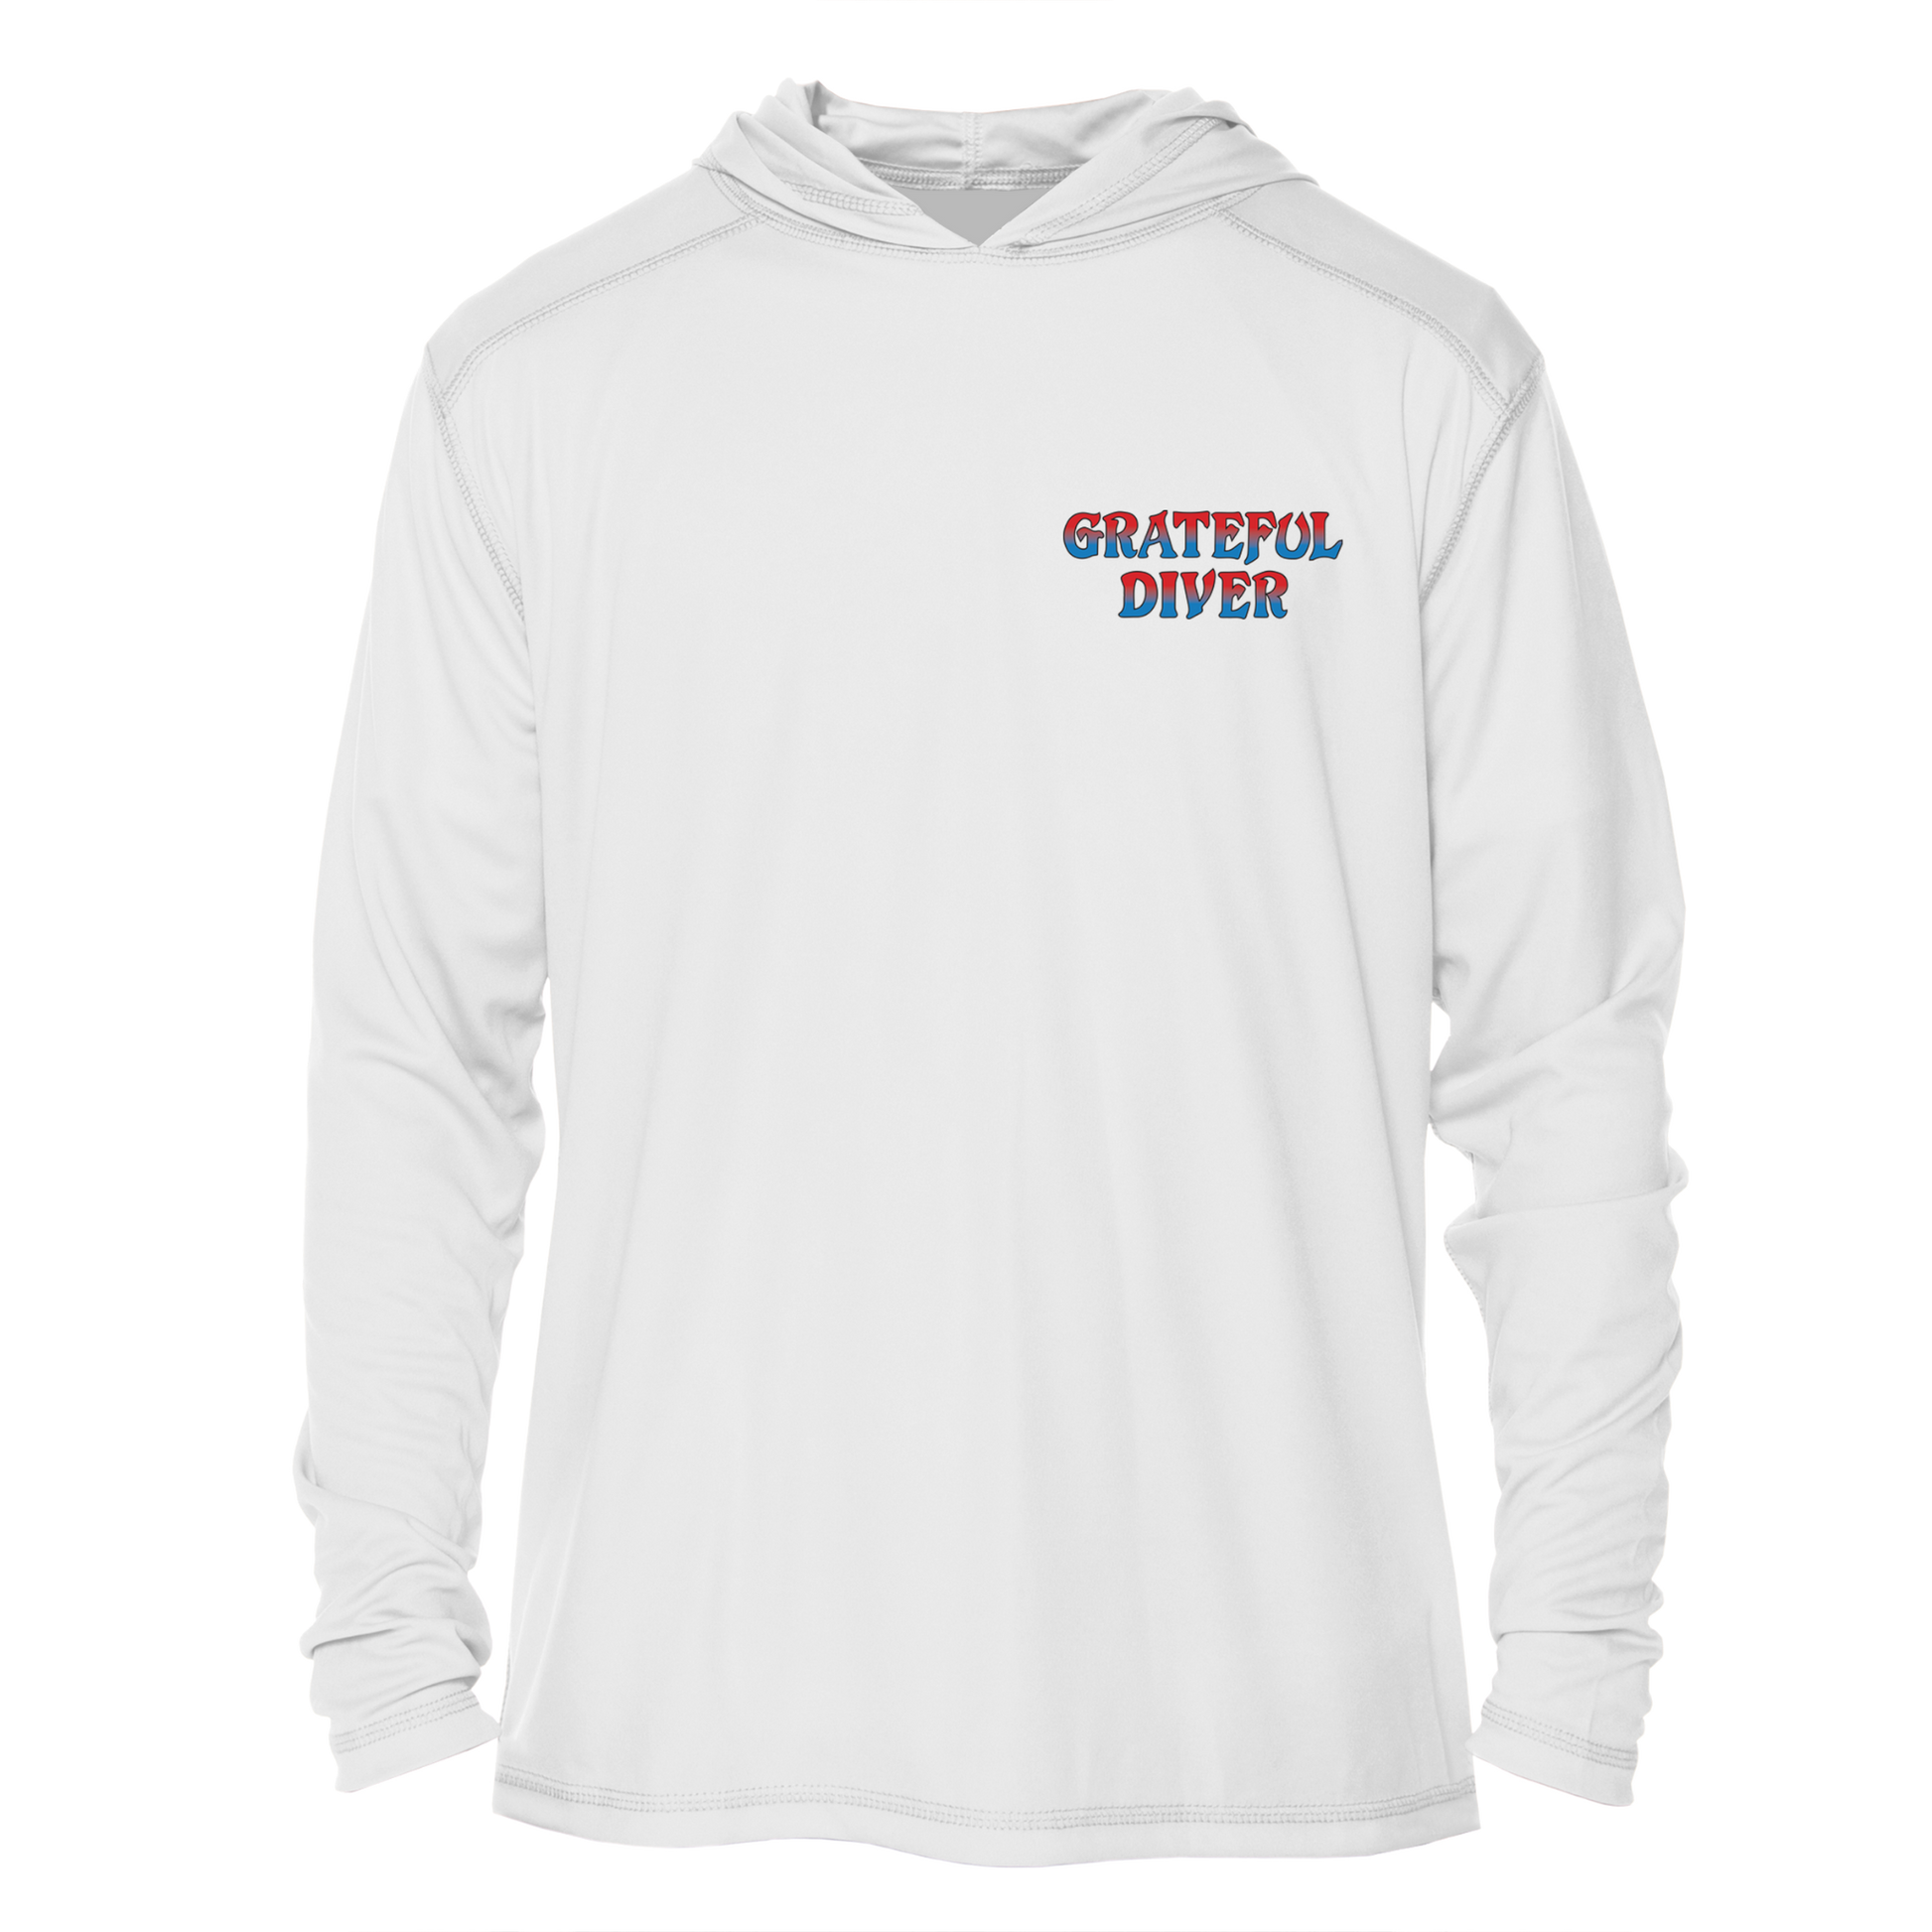 Grateful Diver Classic UV Shirt Hoodie in white front shot off figure